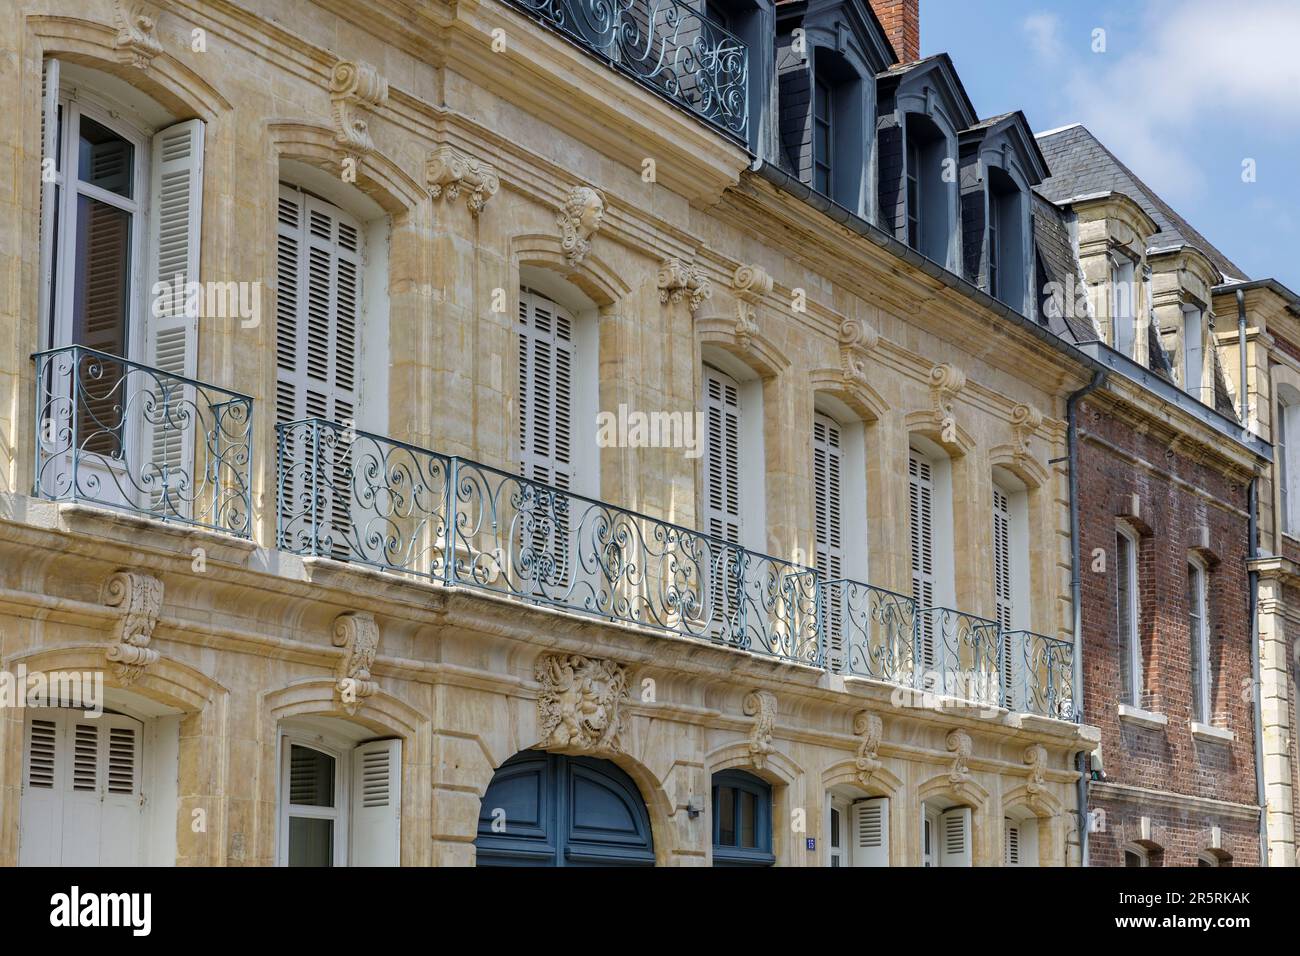 France, Eure, Risle Valley, Pont-Audemer, labeled the Most Beautiful Detours of France, nicknamed the Little Venice of Normandy, Rue Sadi-Carnot, stone facade of a luxurious mansion, decorated with bas-reliefs Stock Photo